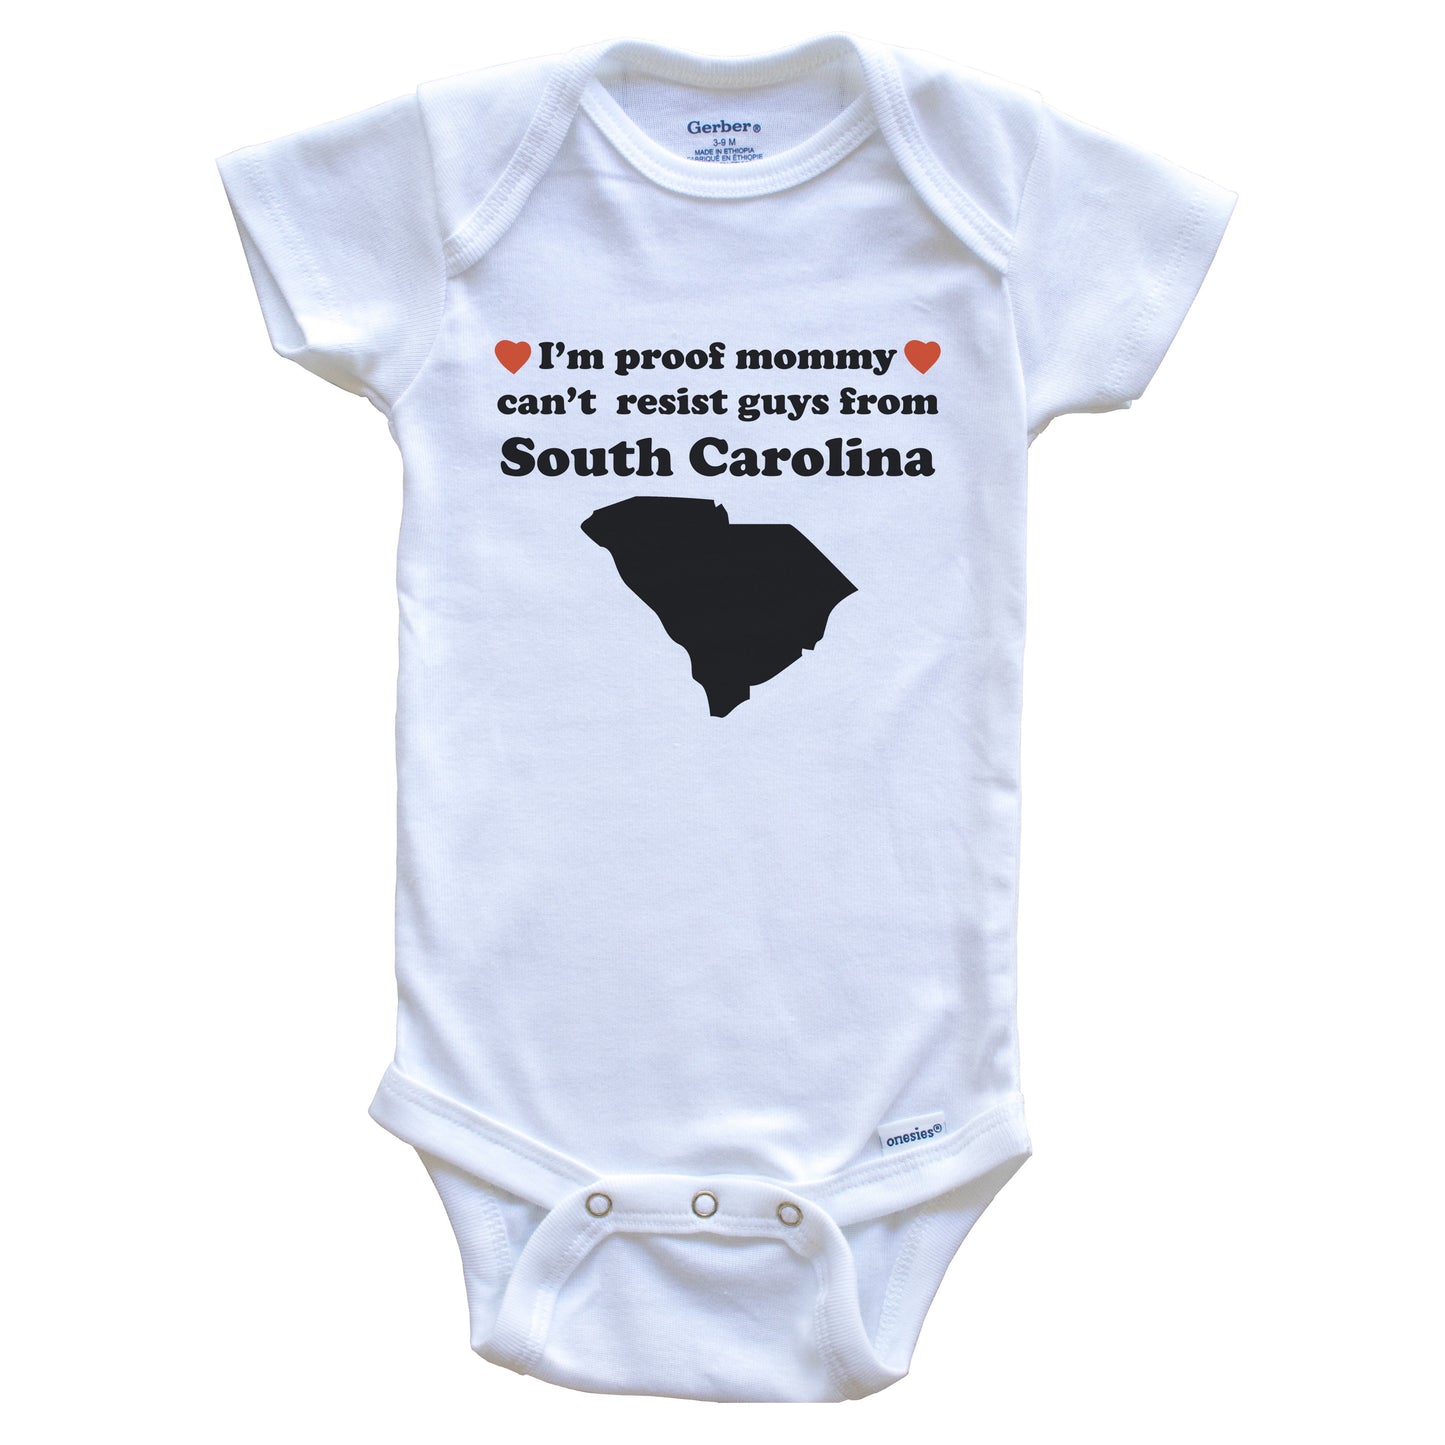 I'm Proof Mommy Can't Resist Guys From South Carolina Baby Onesie - Funny South Carolina Silhouette Baby Bodysuit